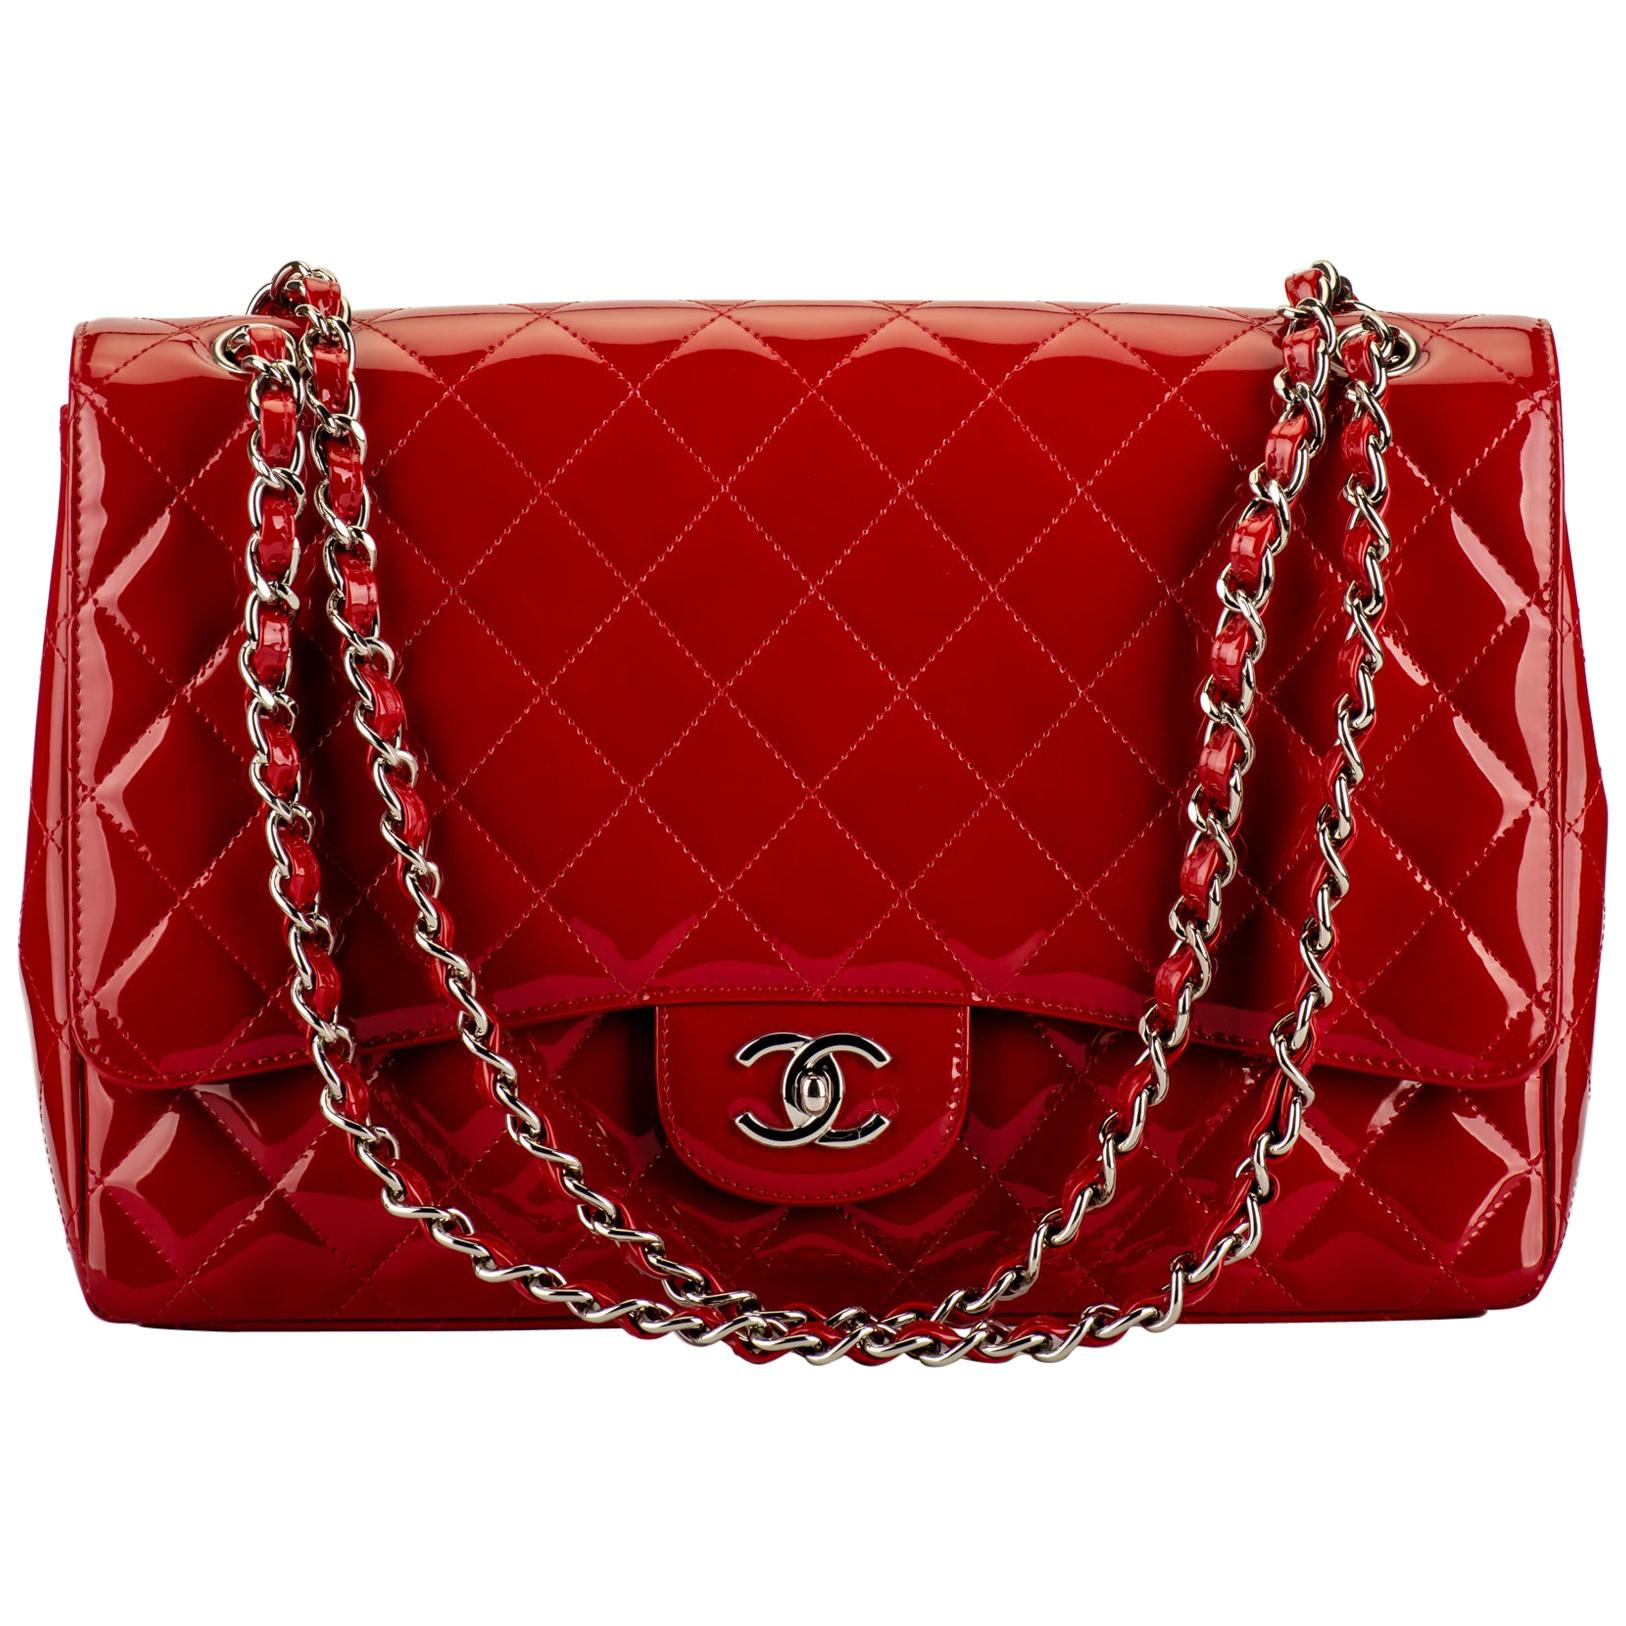 Chanel Red Patent Maxi Flap Bag Mint Condition